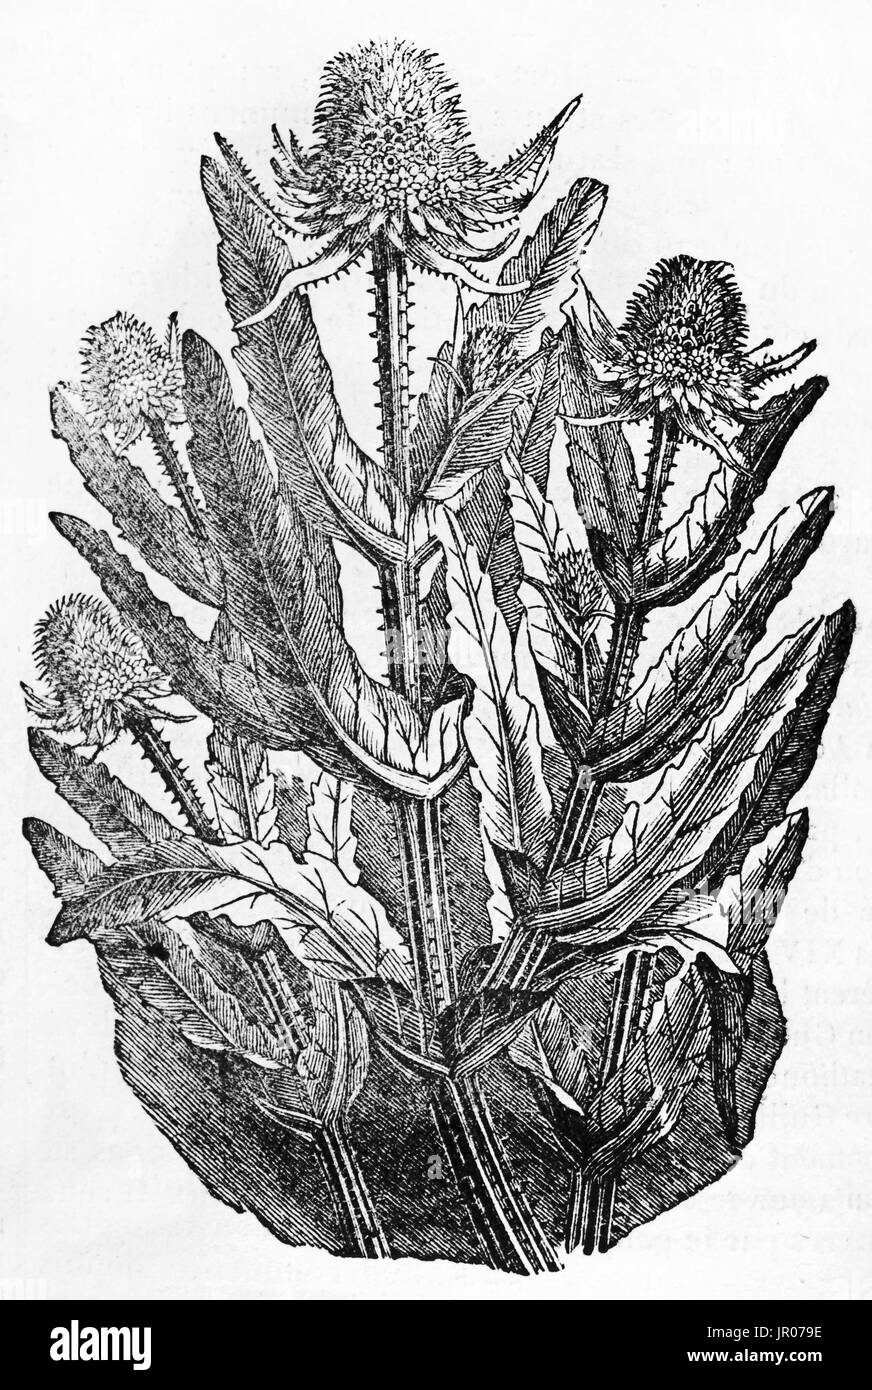 Old illustration of Wild Teasel (Dipsacus fullonum). By unidentified author, published on Magasin Pittoresque, Paris, 1833. Stock Photo